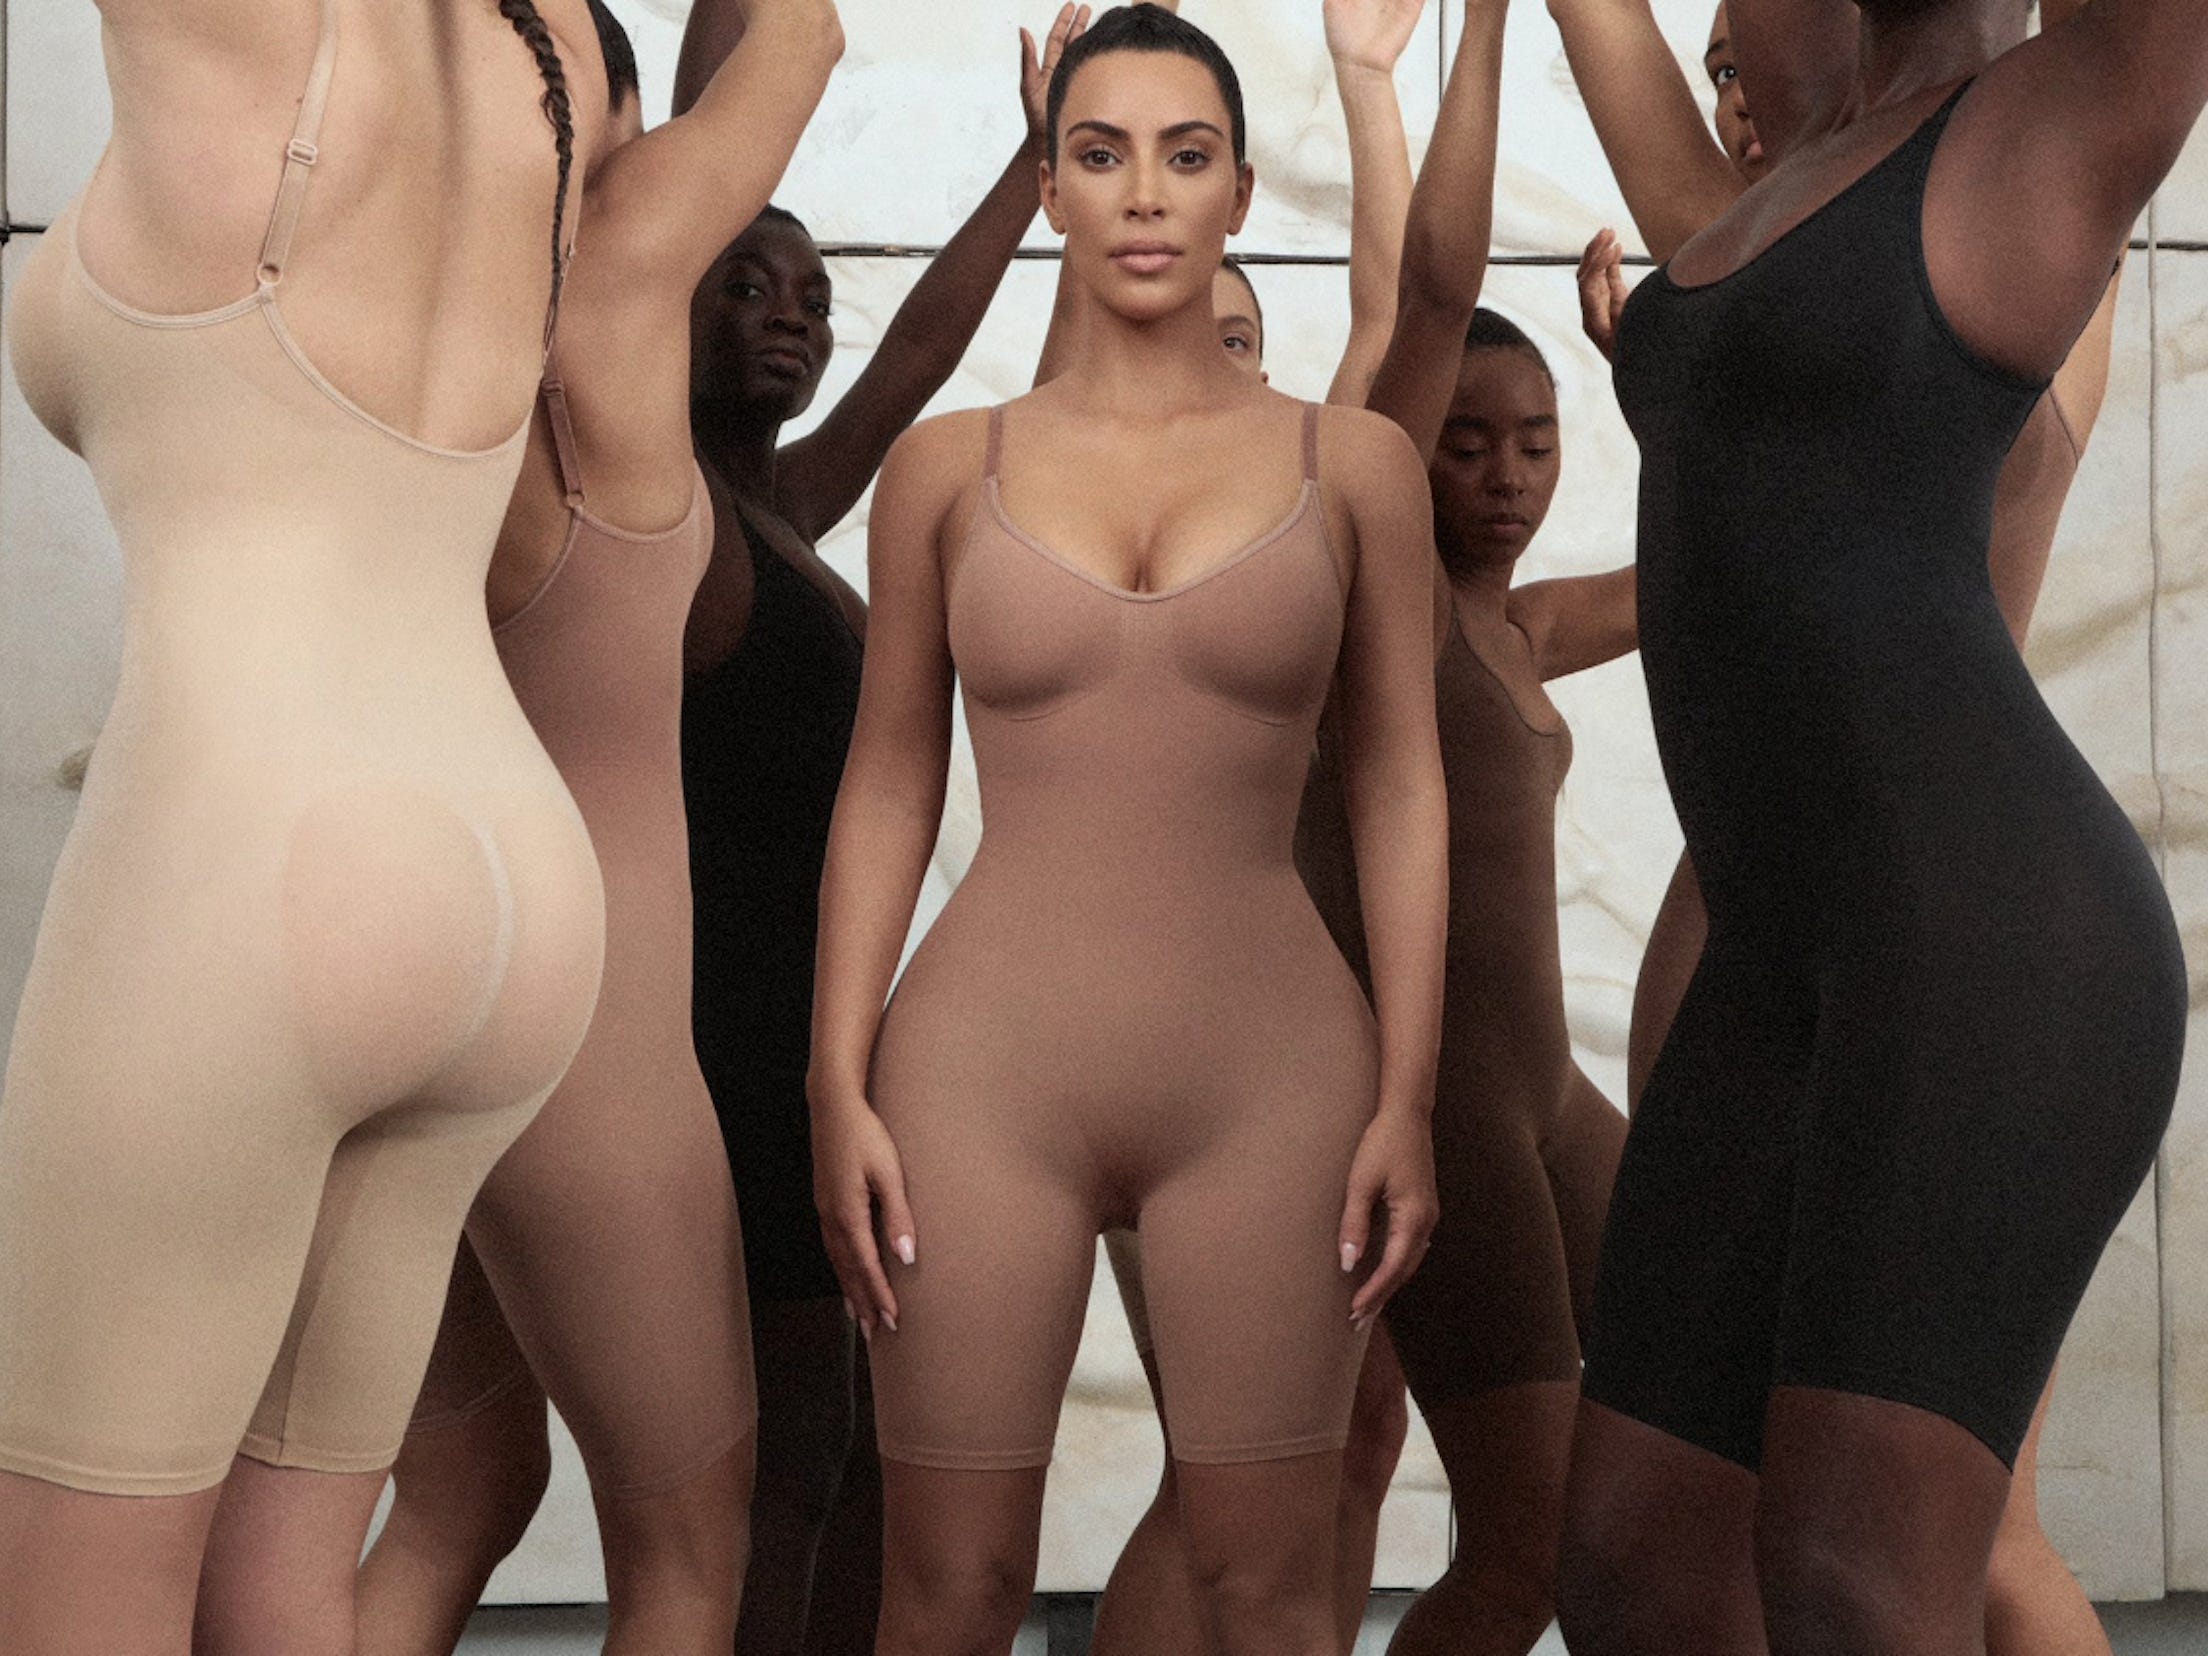 Kim Kardashian is launching a new SKIMS maternity line, and people have  mixed reactions to the pregnancy shapewear